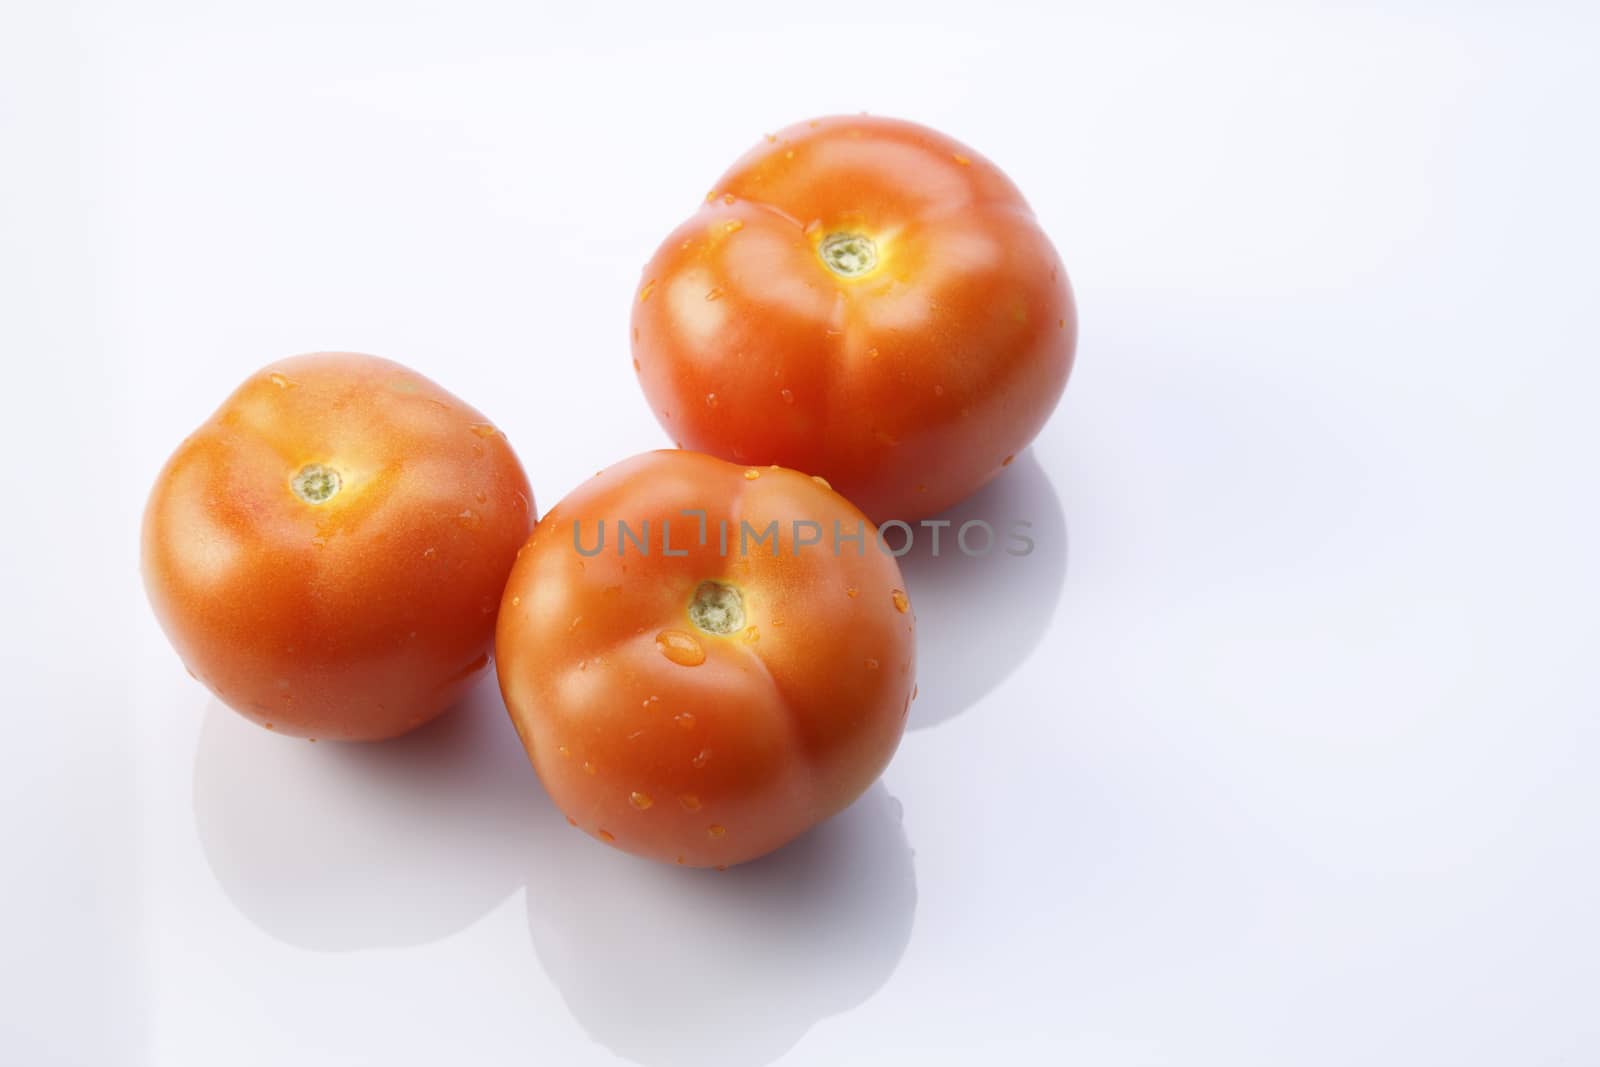 top view of tomatoes on the white backgrond